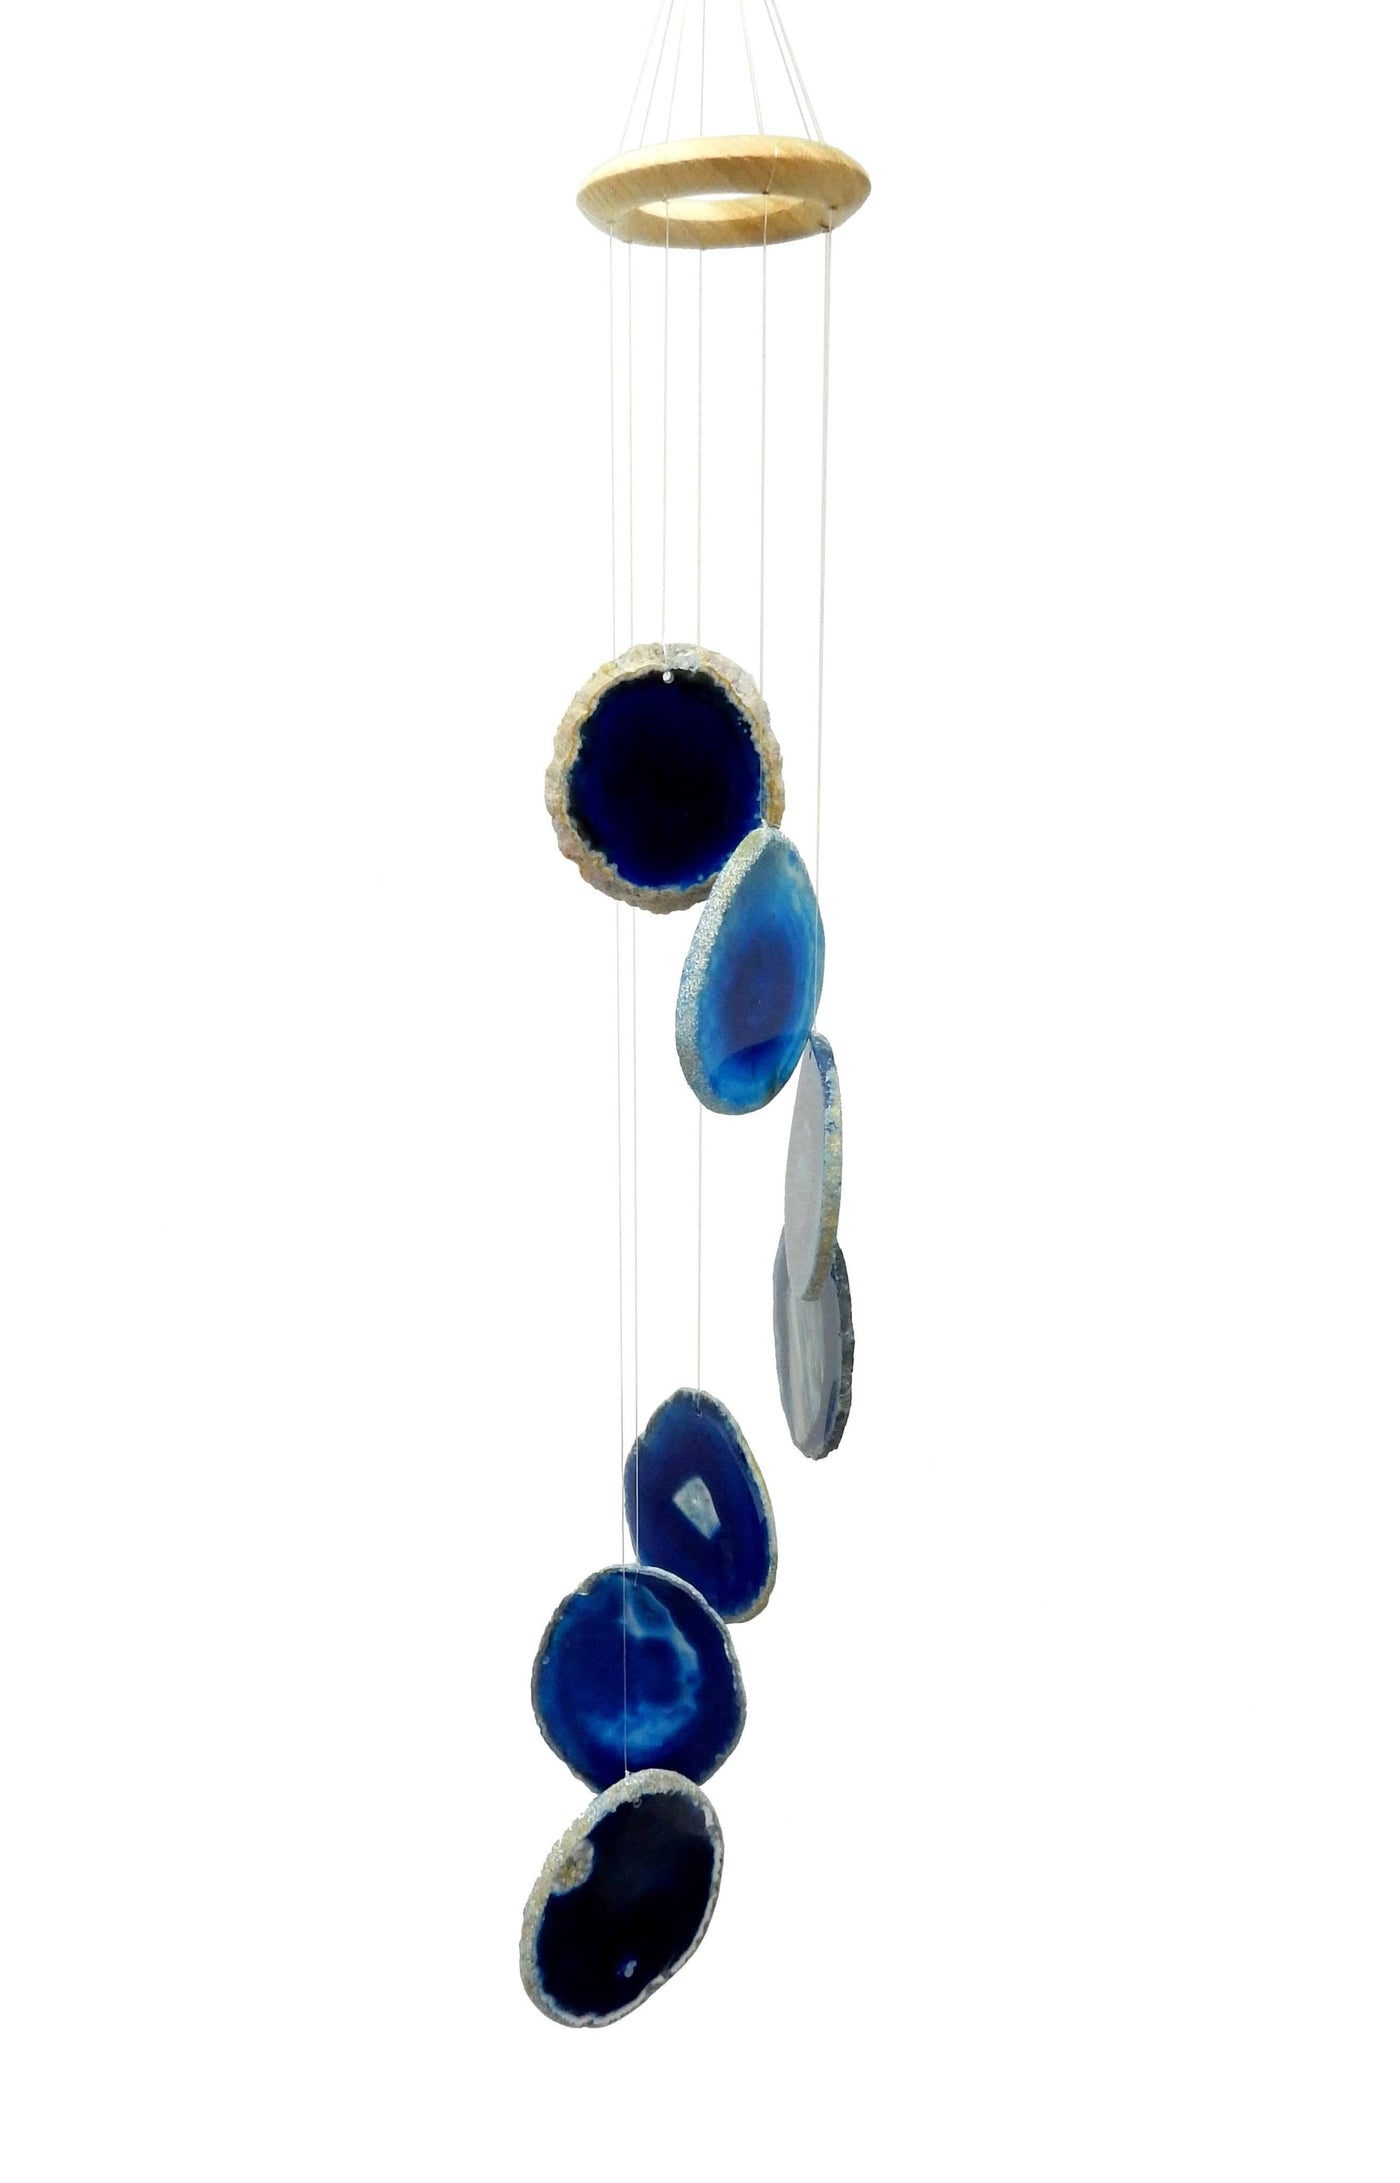 Picture of our blue agate windchime hanging, displayed on a white background.